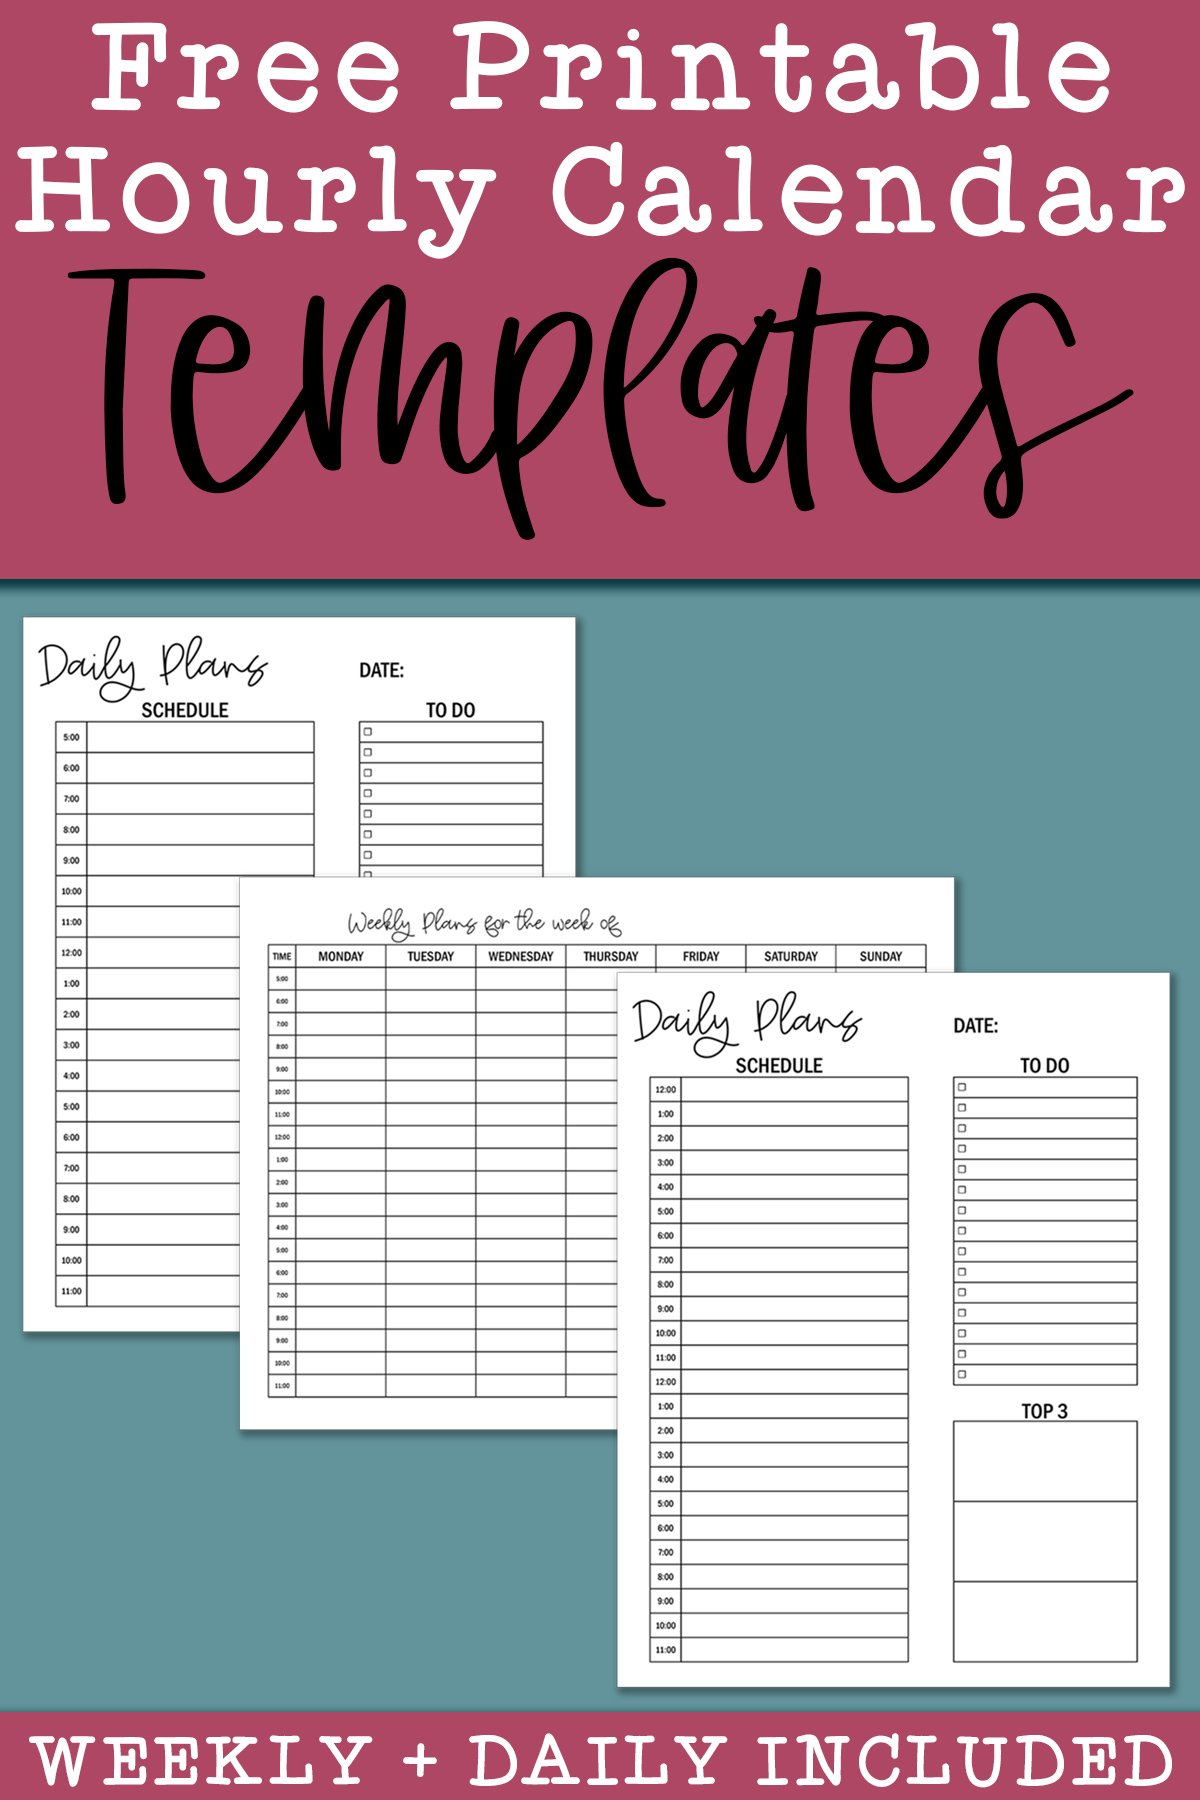 The top of this image says free printable hourly calendar templates. At the bottom it says weekly + daily included. In the middle are 3 of the printable hourly calendar options you can get for free at the end of this blog post.